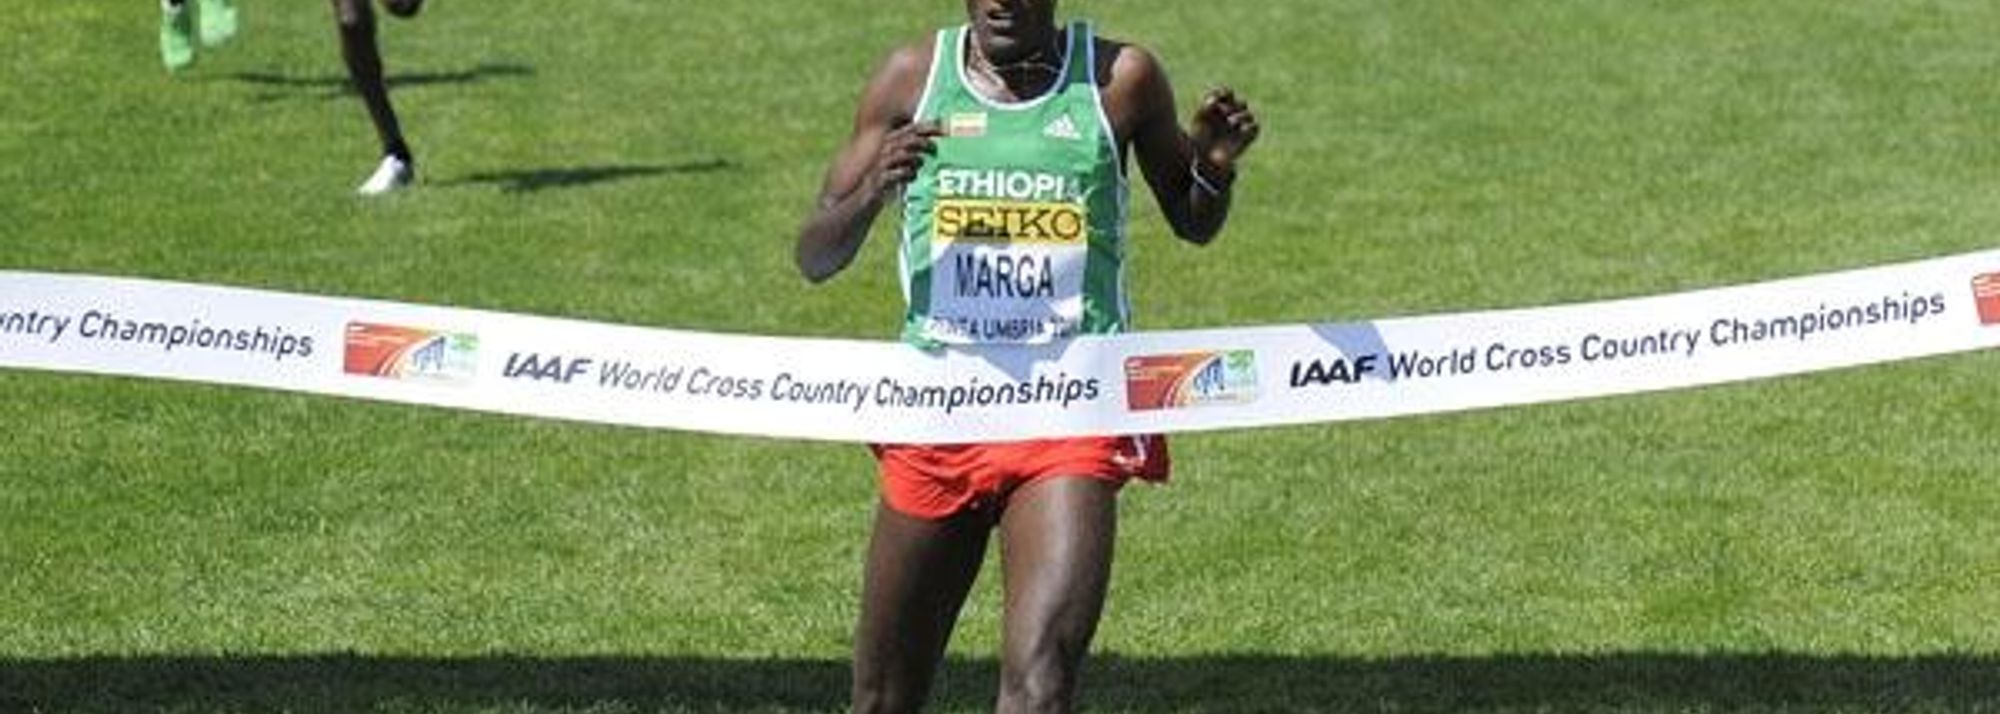 The IAAF World Cross Country Championships traditionally heralds the climax, and the end of the cross country season, but Ethiopia’s 2011 senior men’s champion Imana Merga cannot relax and hang up his spikes just yet.